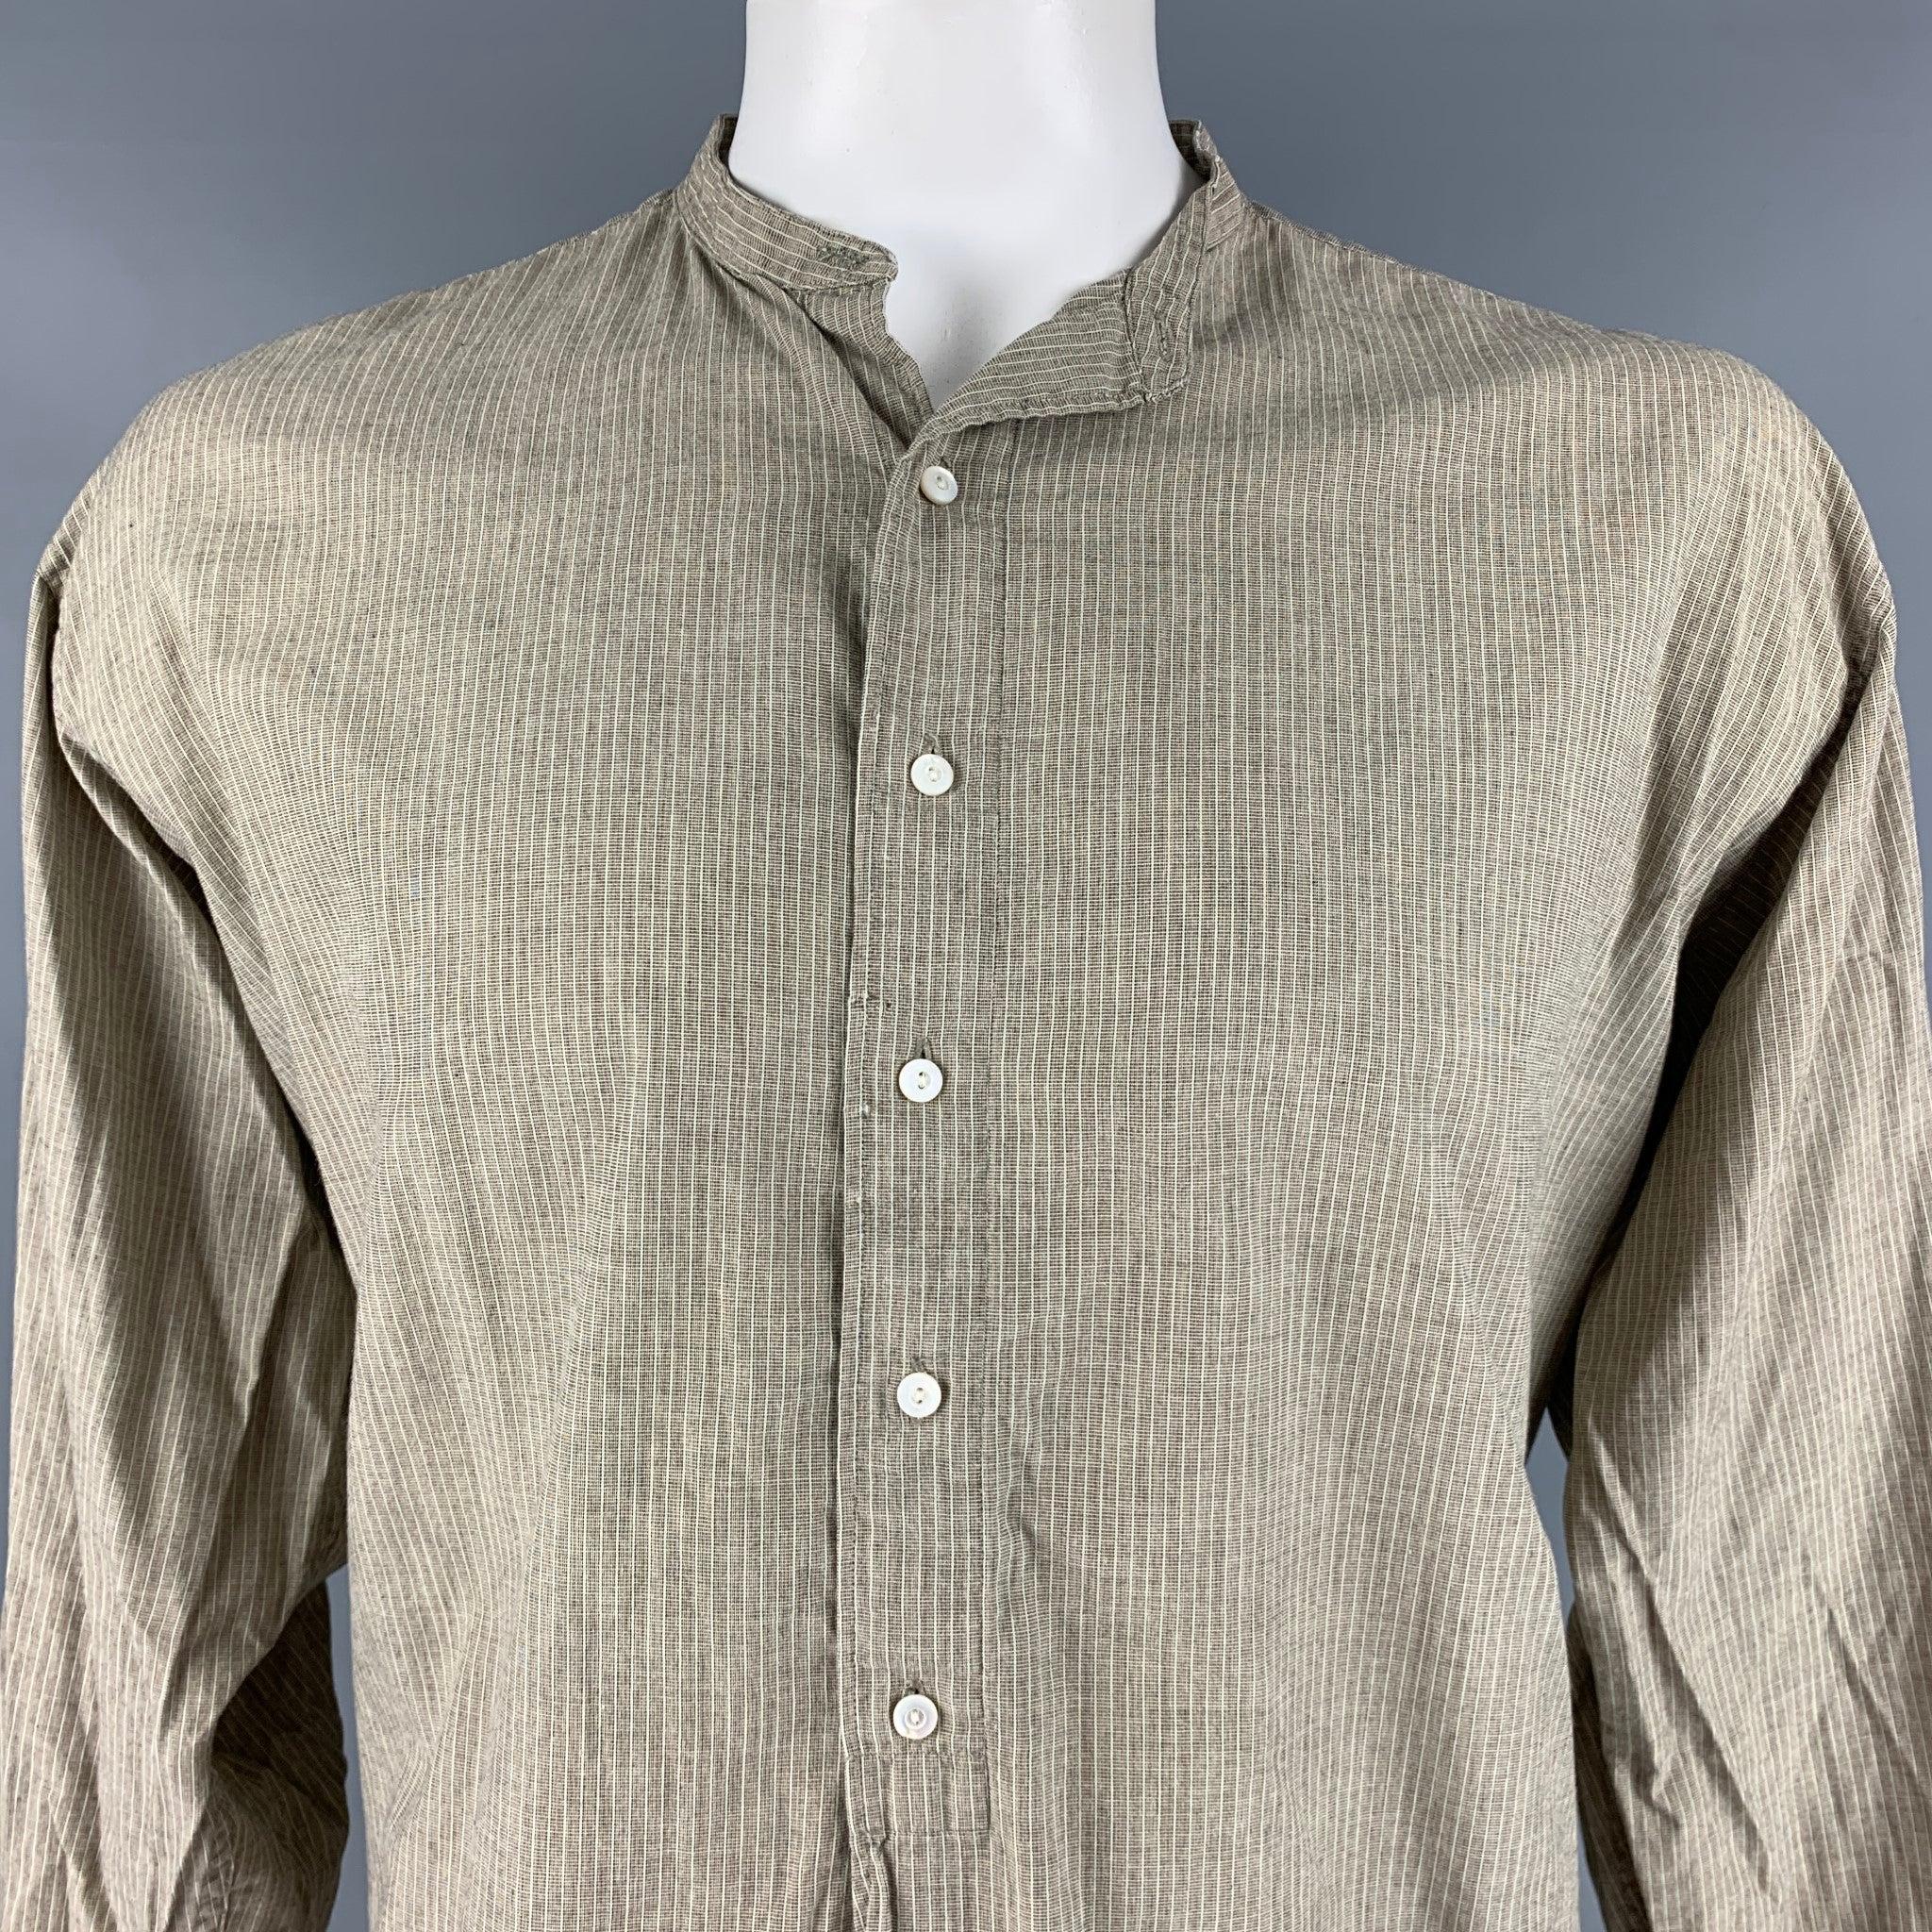 RRL by RALPH LAUREN
long sleeve shirt in a beige and taupe cotton fabric, featuring a vertical striped pattern, relaxed Nehru collar, and a long placket button closure.Good Pre-Owned Condition. Signs of wear near shoulder and buttons. 

Marked:   XL